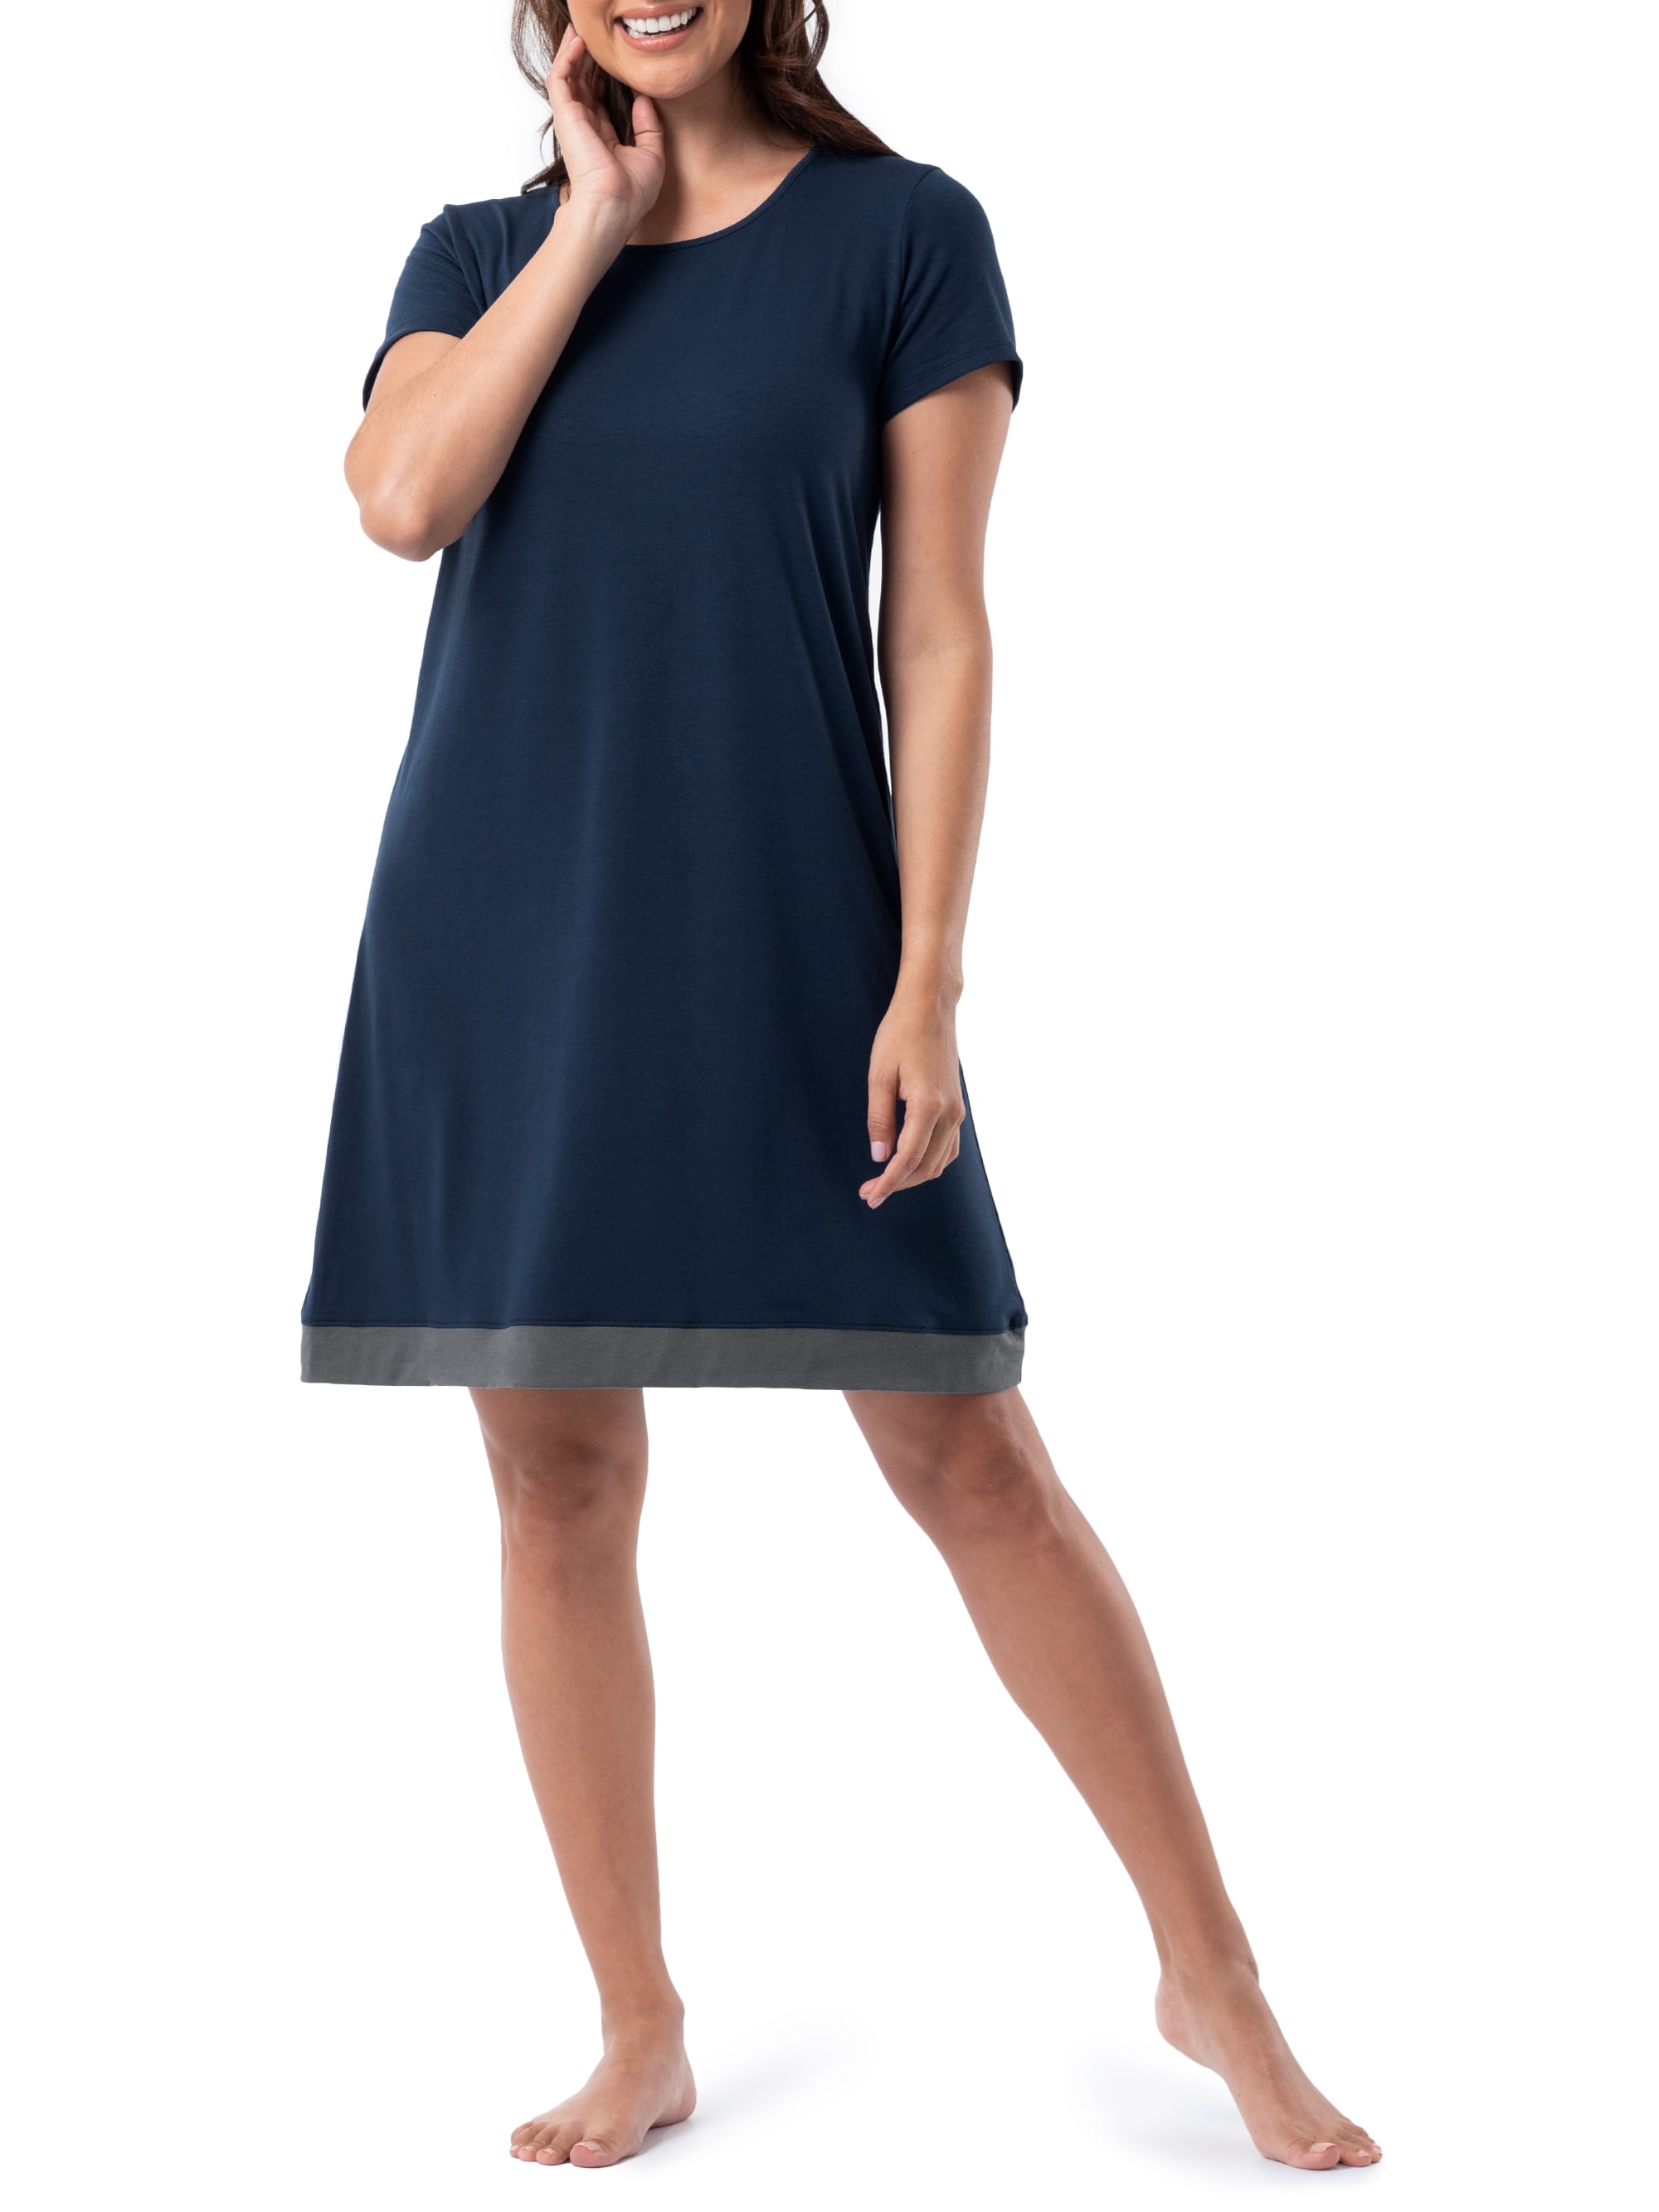 Fruit of the Loom Womens Super Soft and Breathable Sleep Shirt